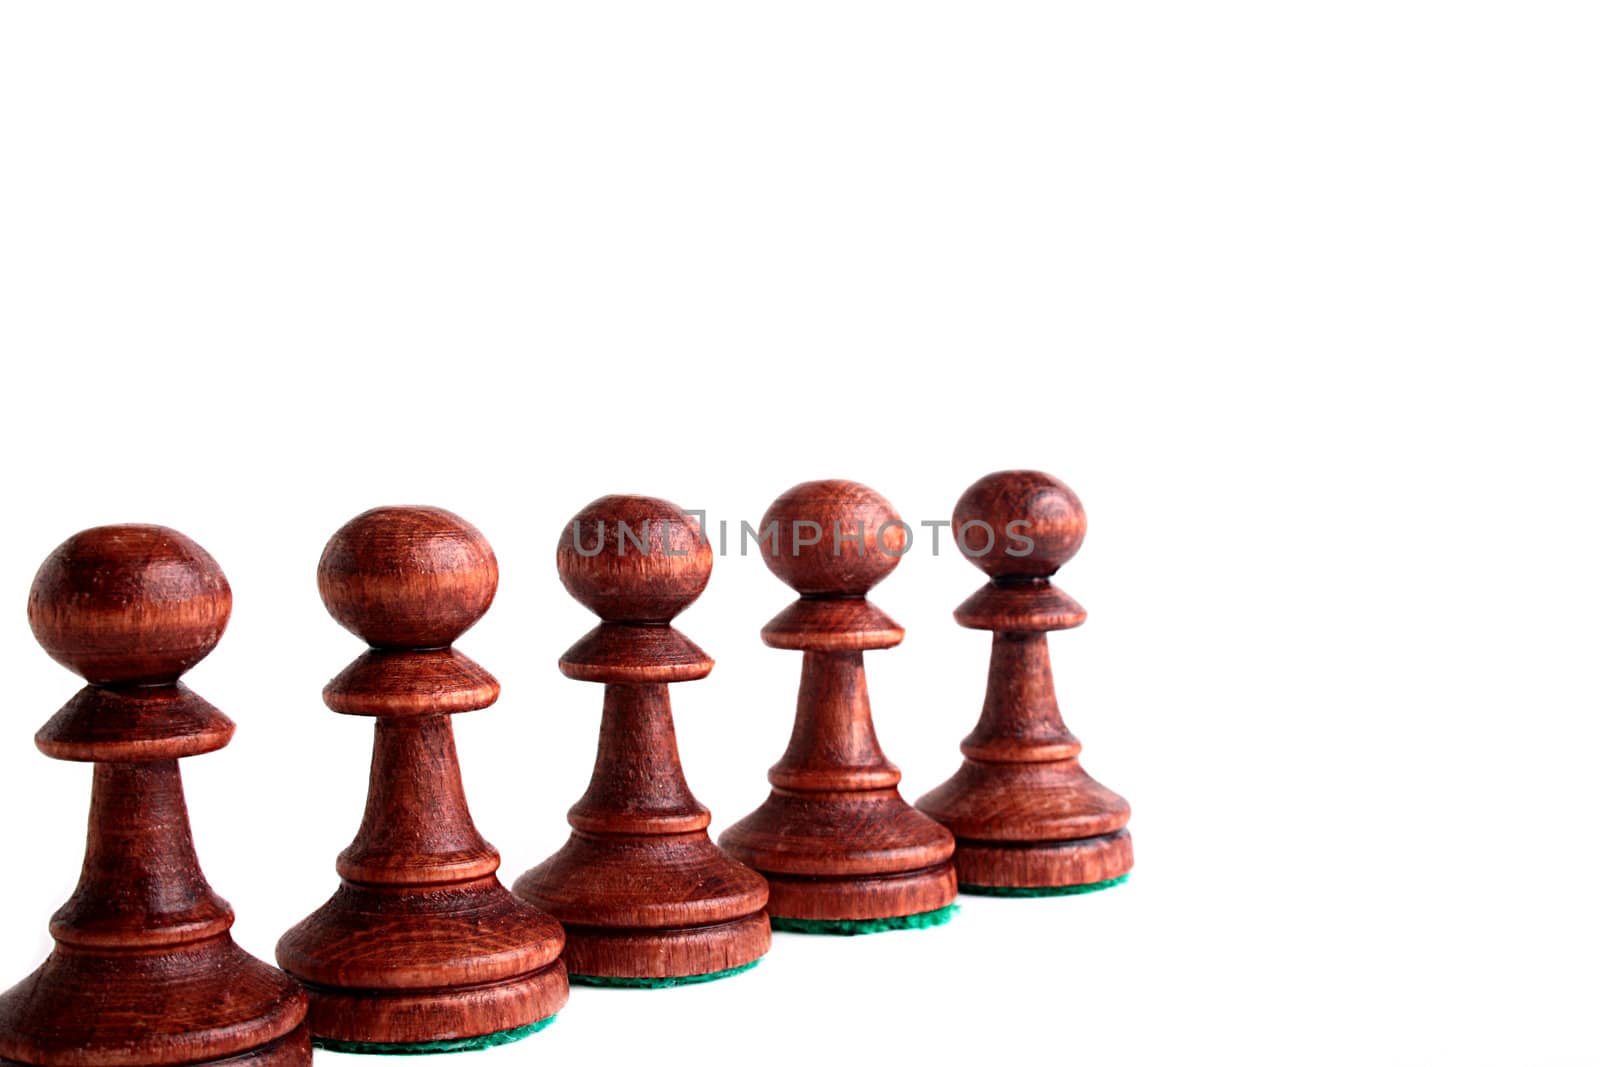 Five black pawns on a white background.